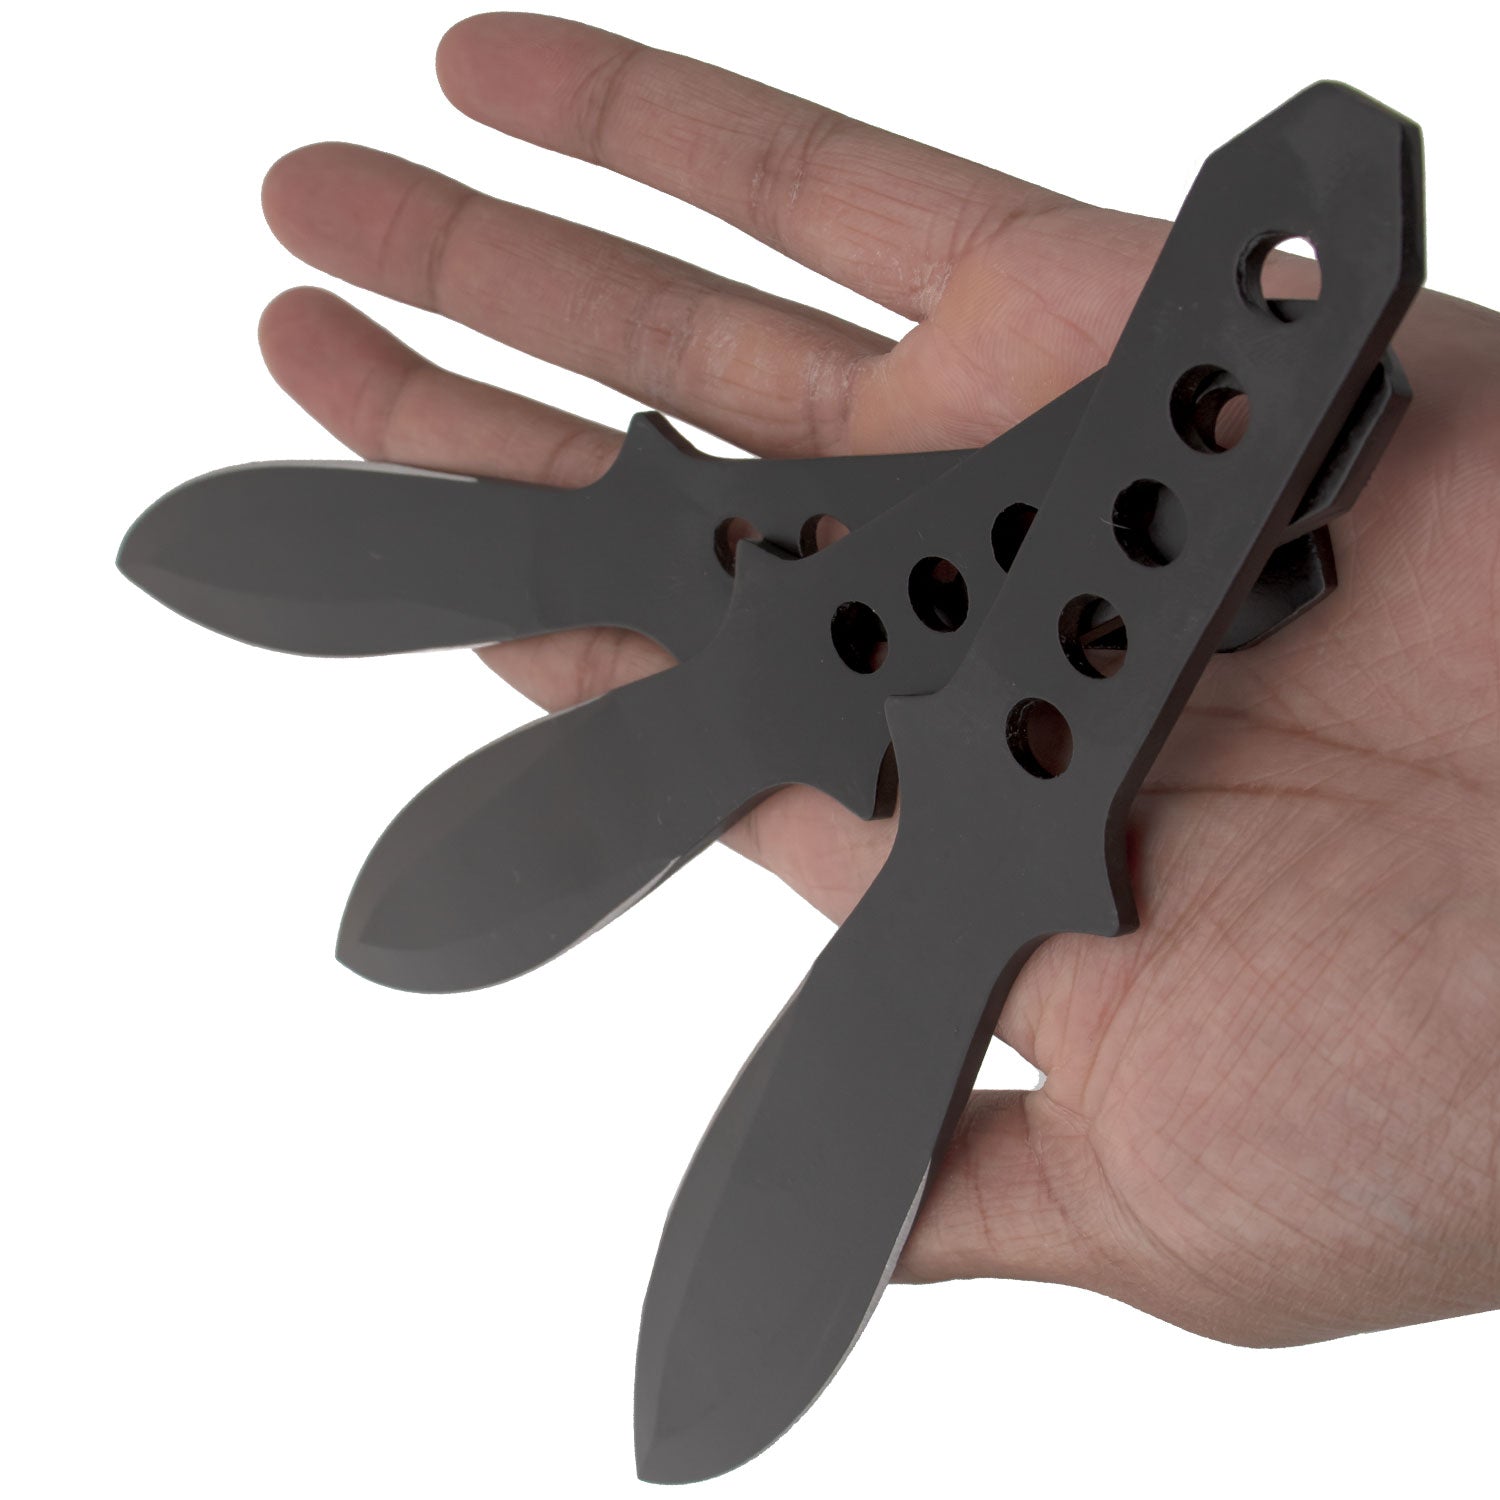 Set of 6 Throwing Knives - Black - 6.5 Inch